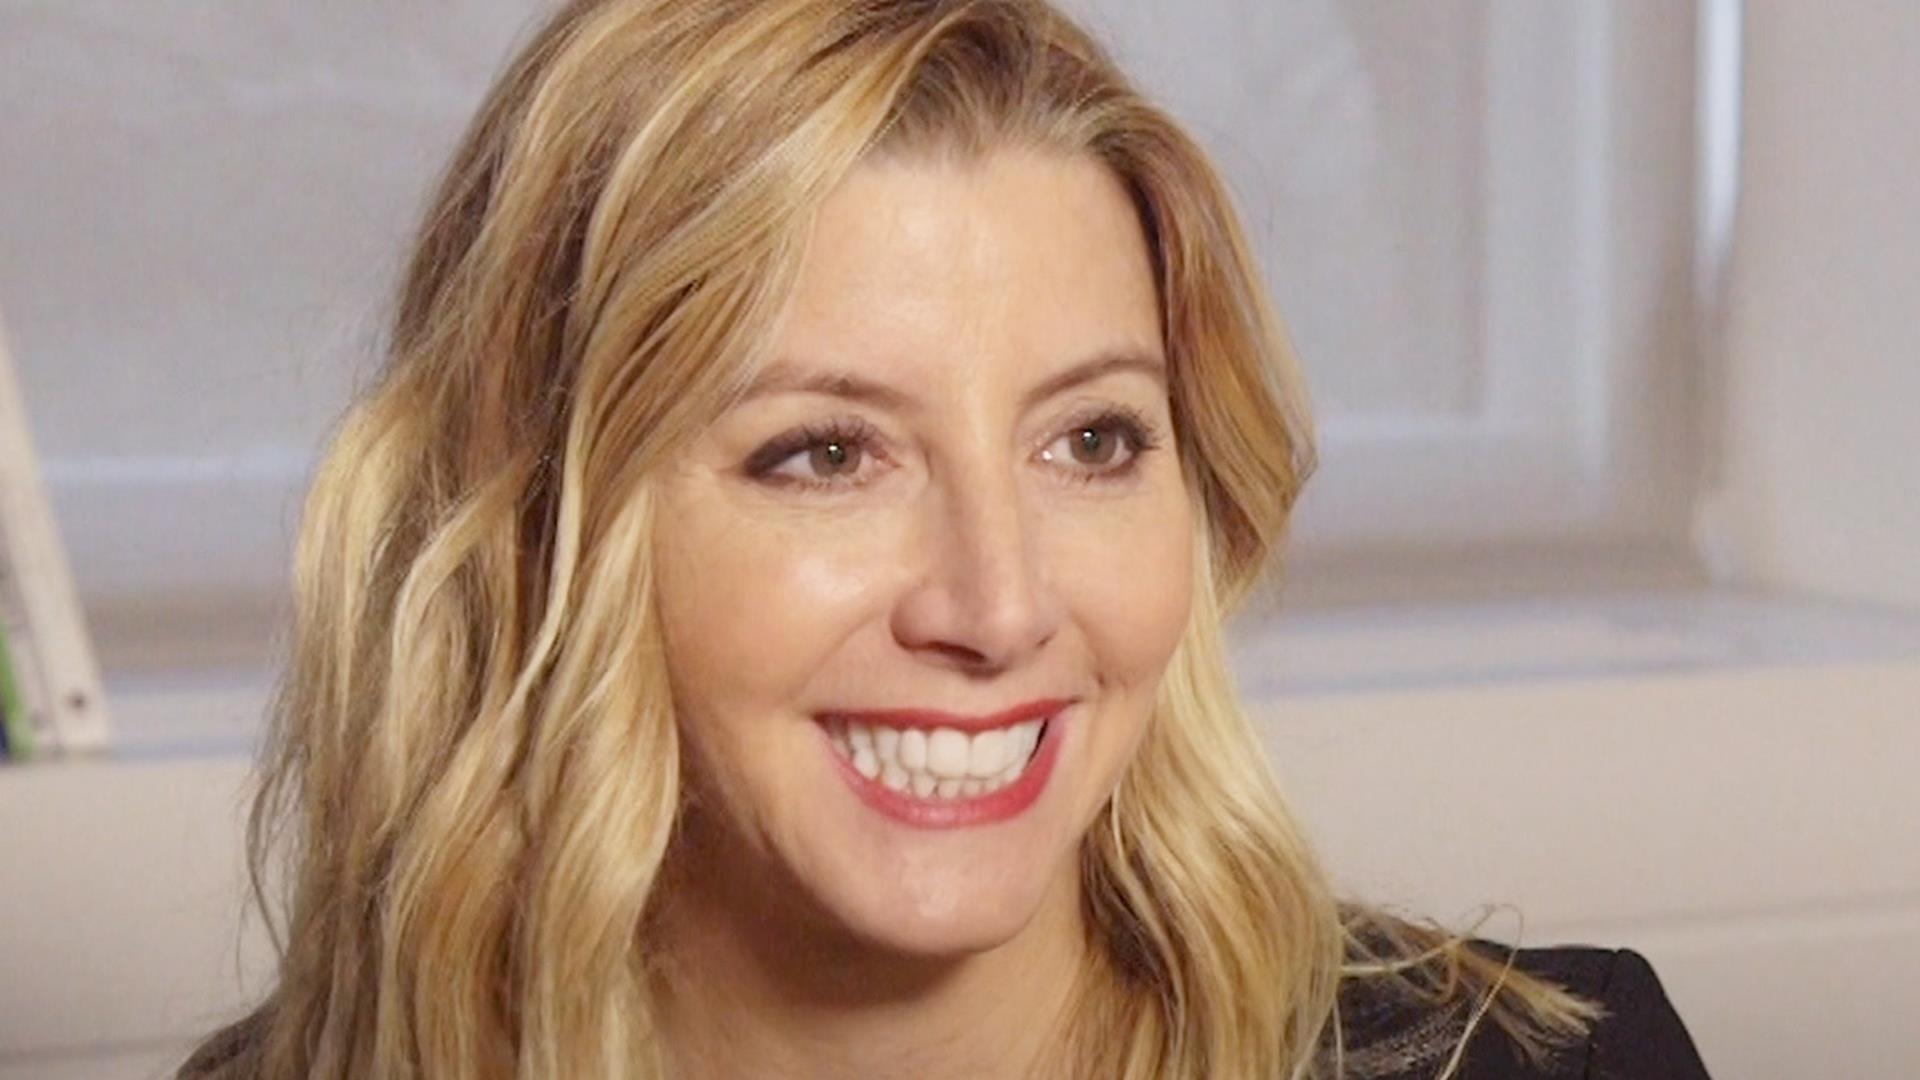 Spanx Founder Sara Blakely Has the Relationship Advice You Need to